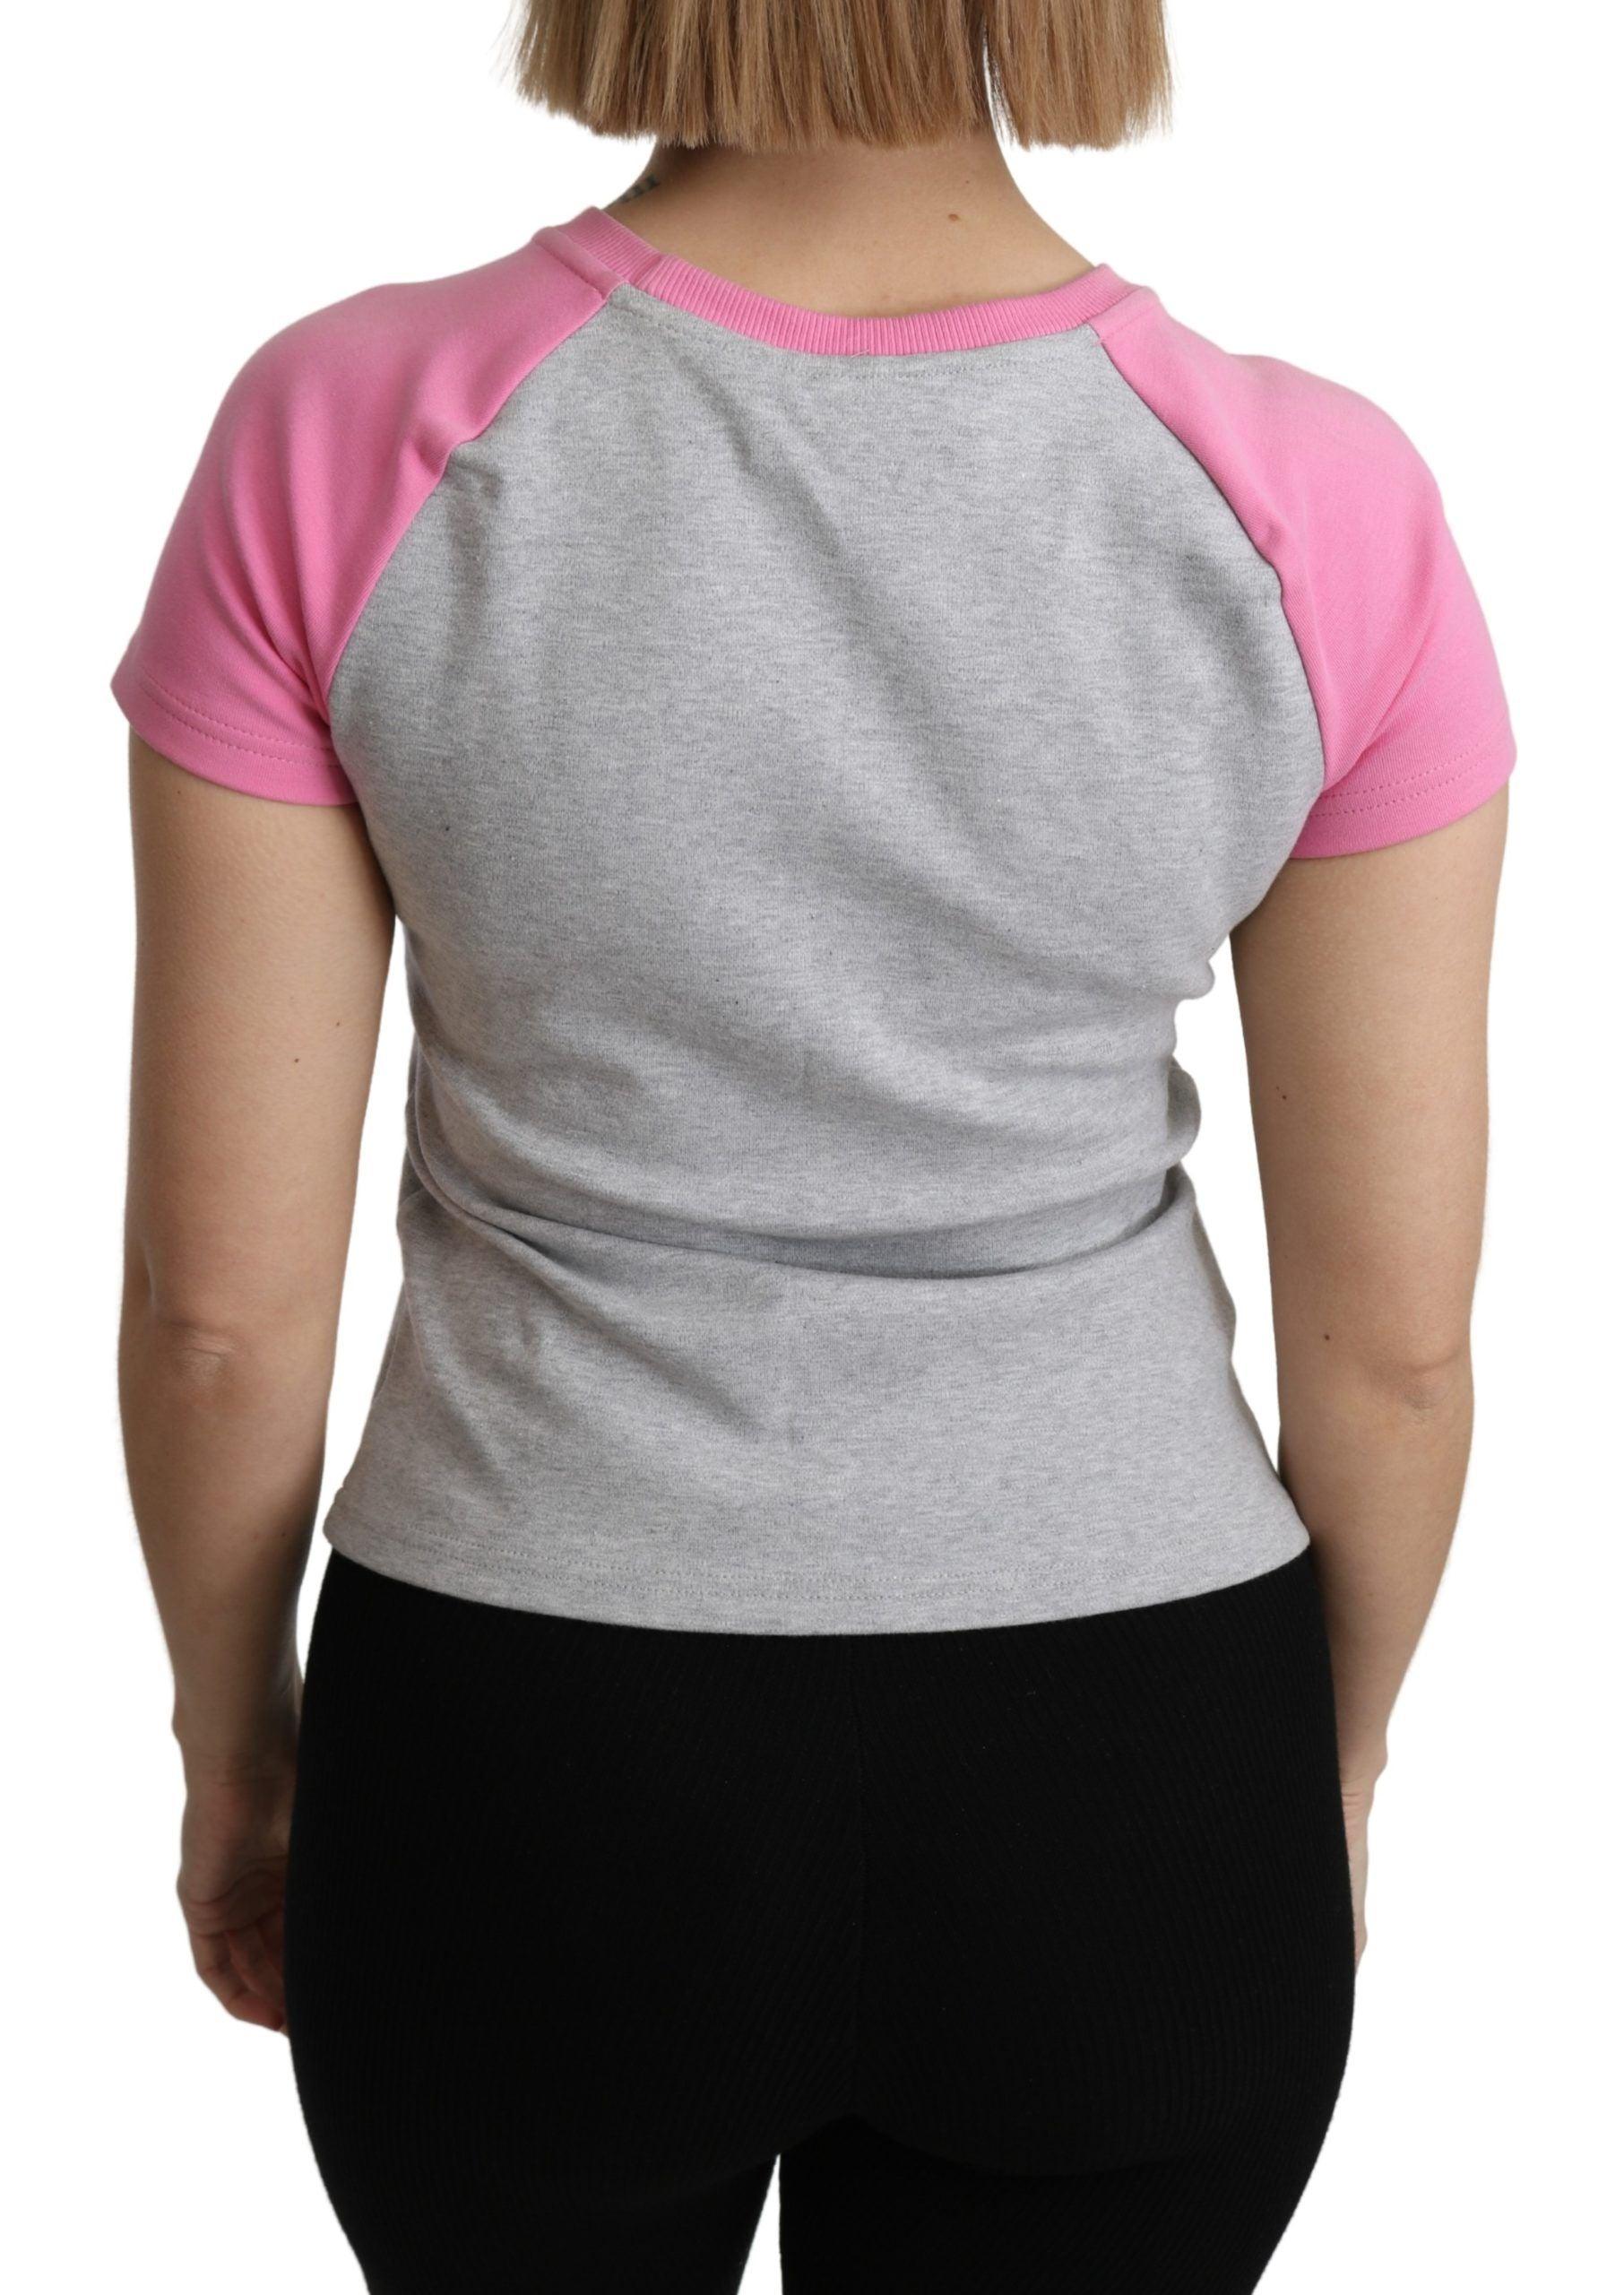 Moschino Chic Gray Crew Neck Cotton T-shirt with Pink Accents - PER.FASHION